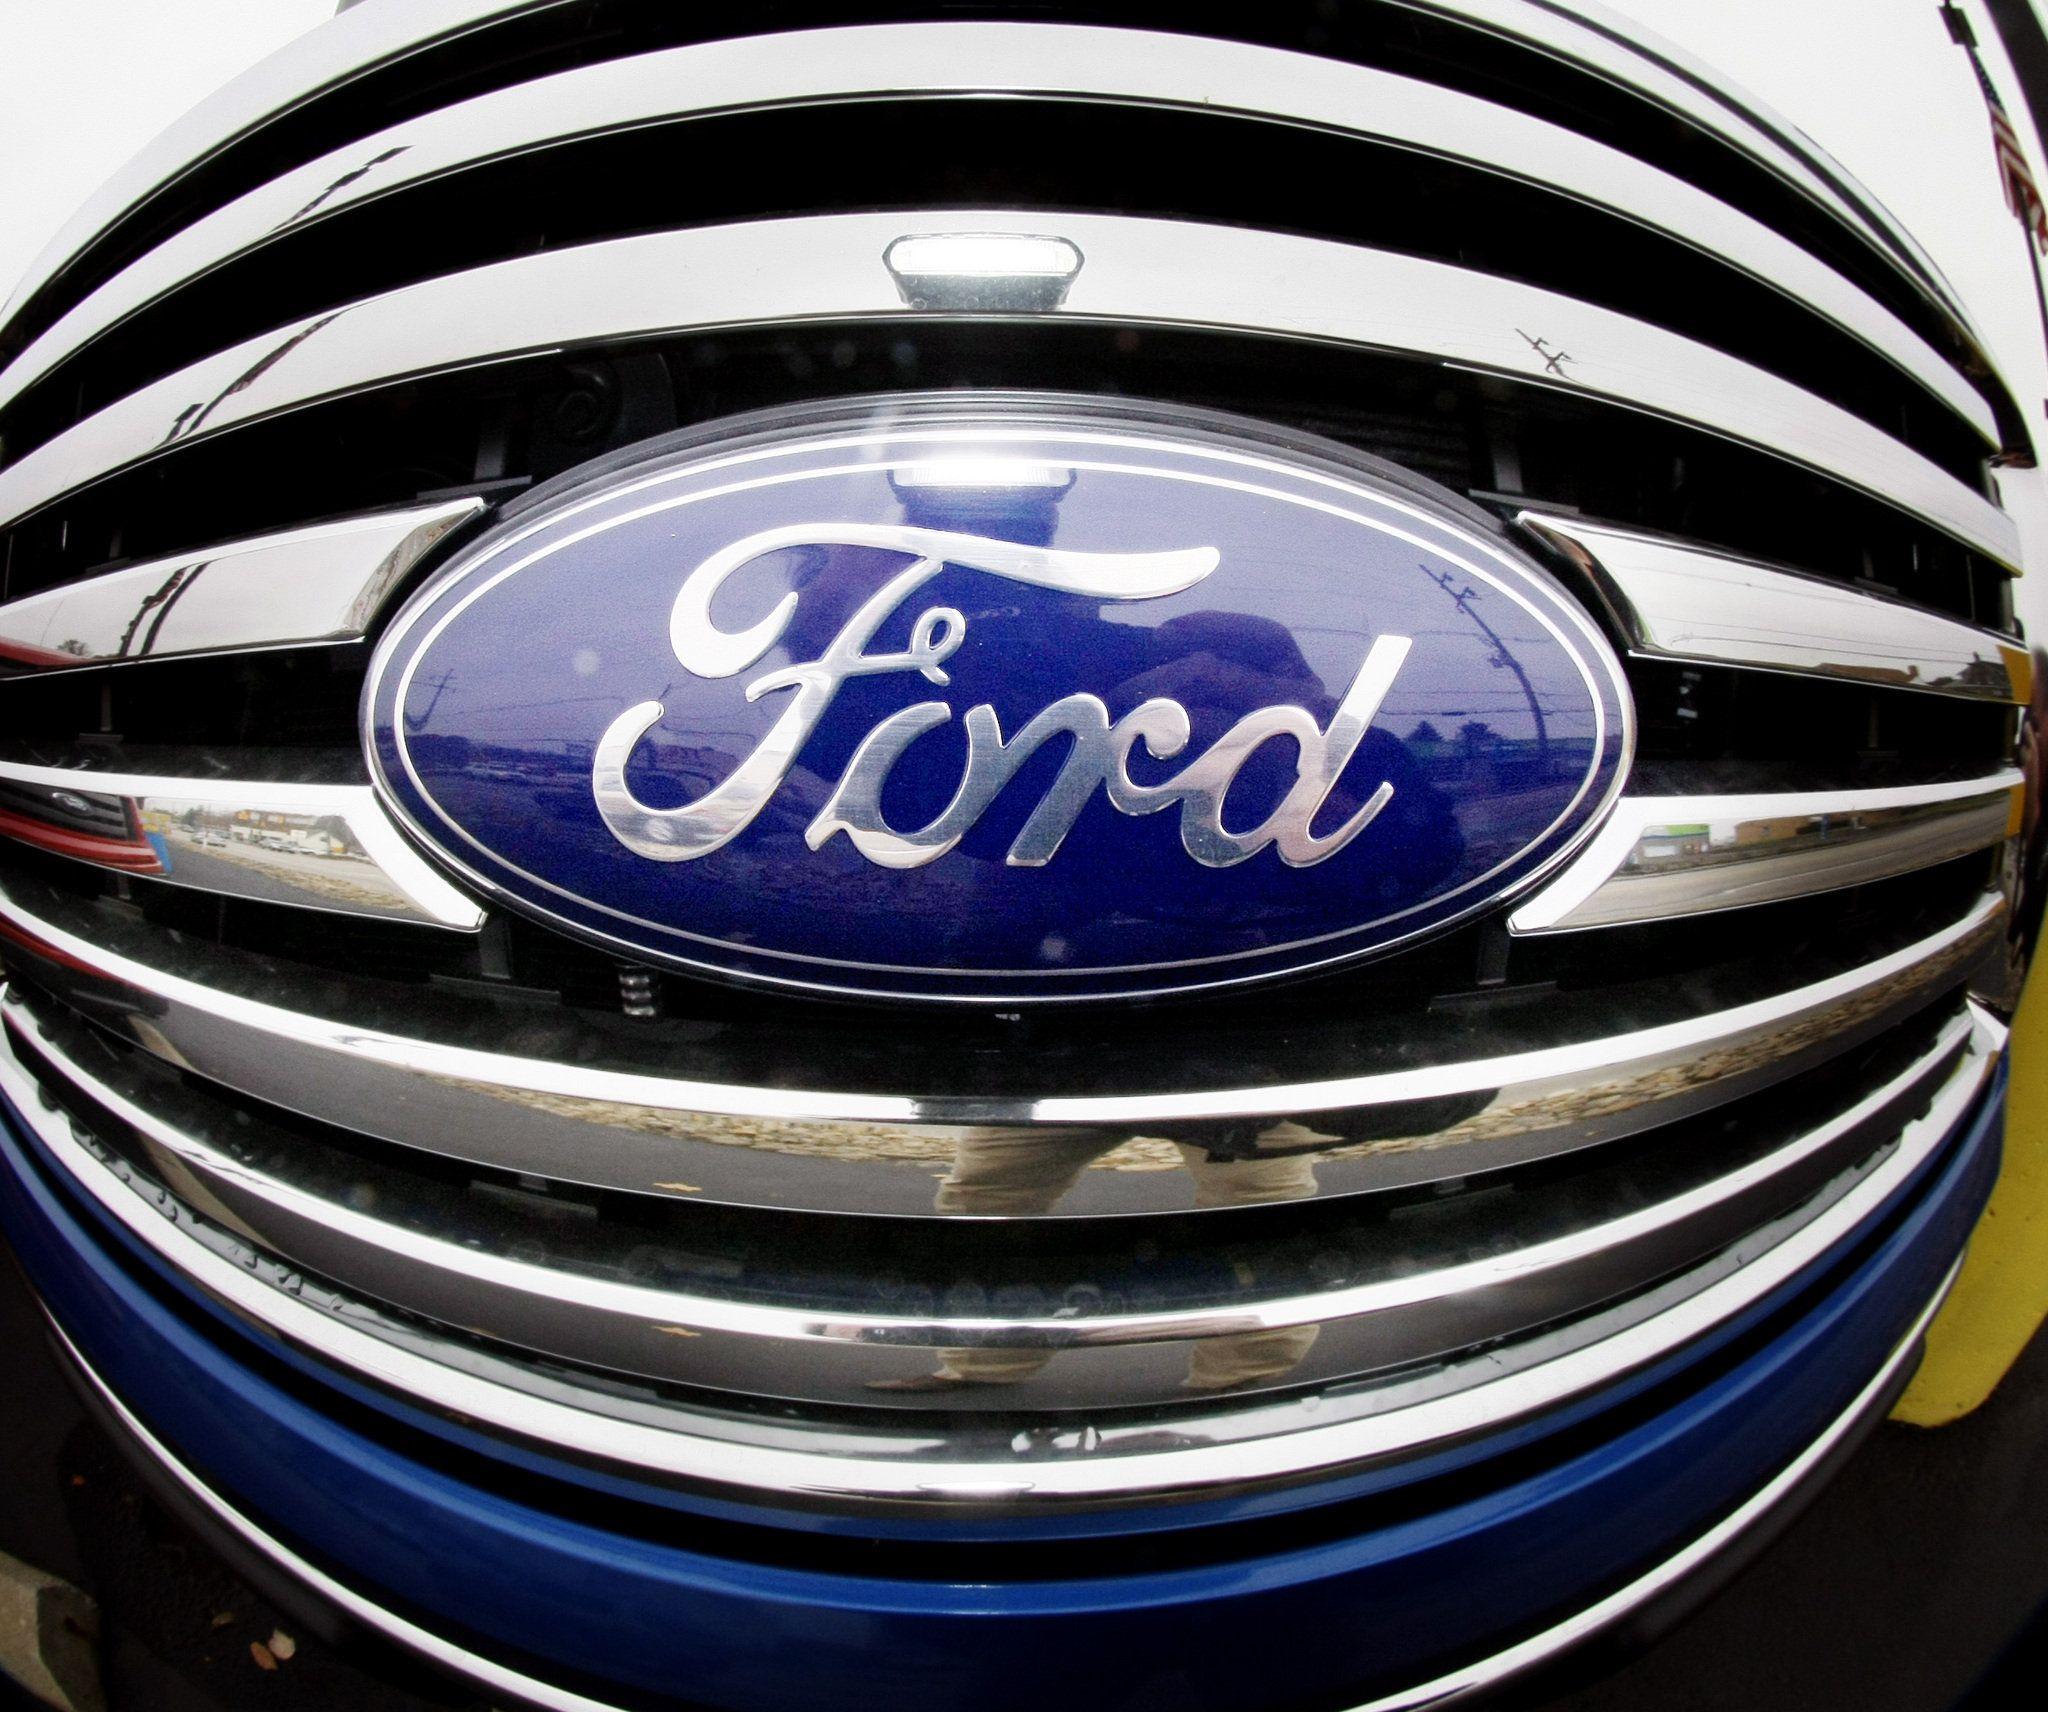 1912 Ford Logo - Ford Logo, Ford Car Symbol Meaning and History | Car Brand Names.com